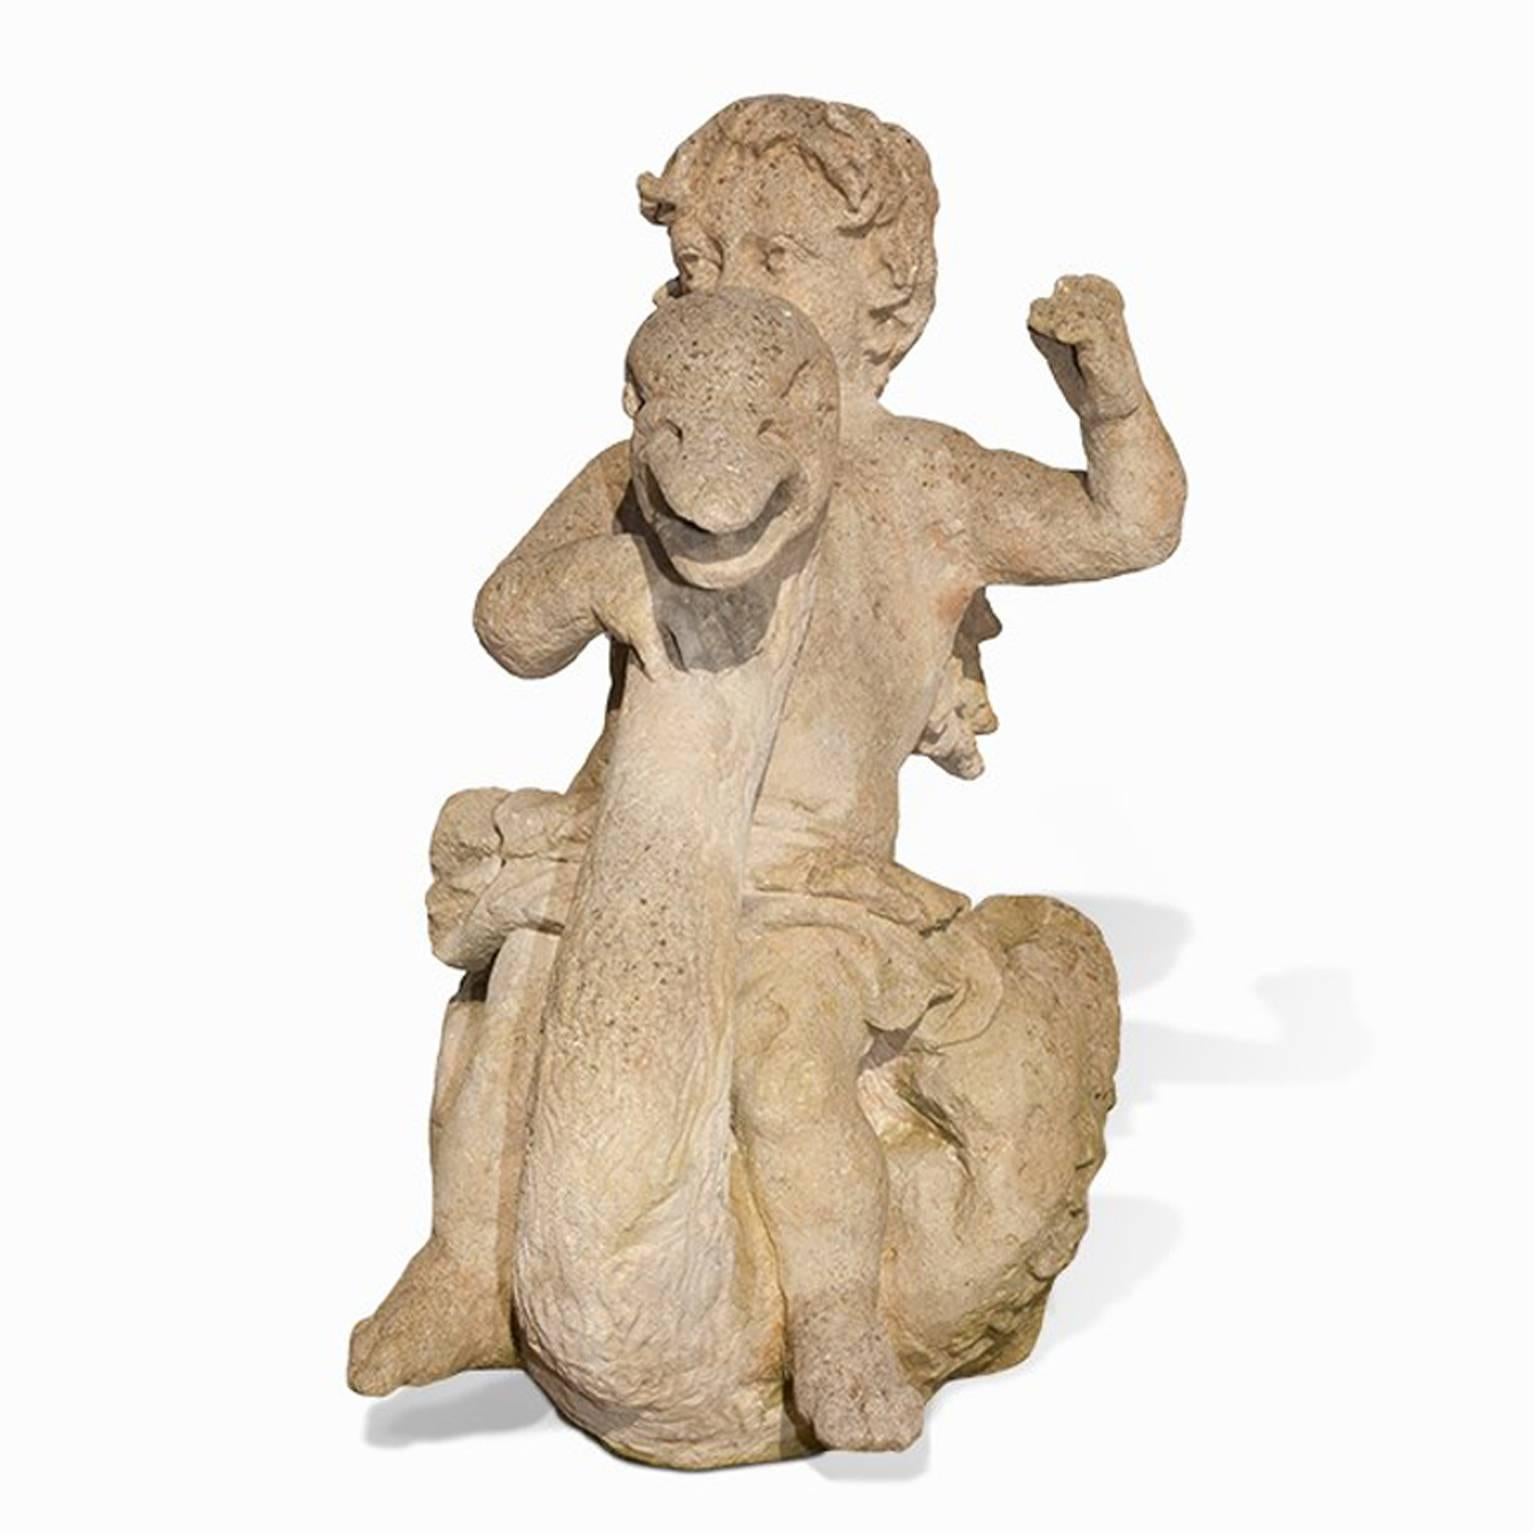 Circa 1720 antique Austrian garden ornament. Beautiful Representations of putti or cherubs were frequently used for allegorical depictions, for repeating a certain thematic design concept and also for purely decorative purposes. Since ancient times